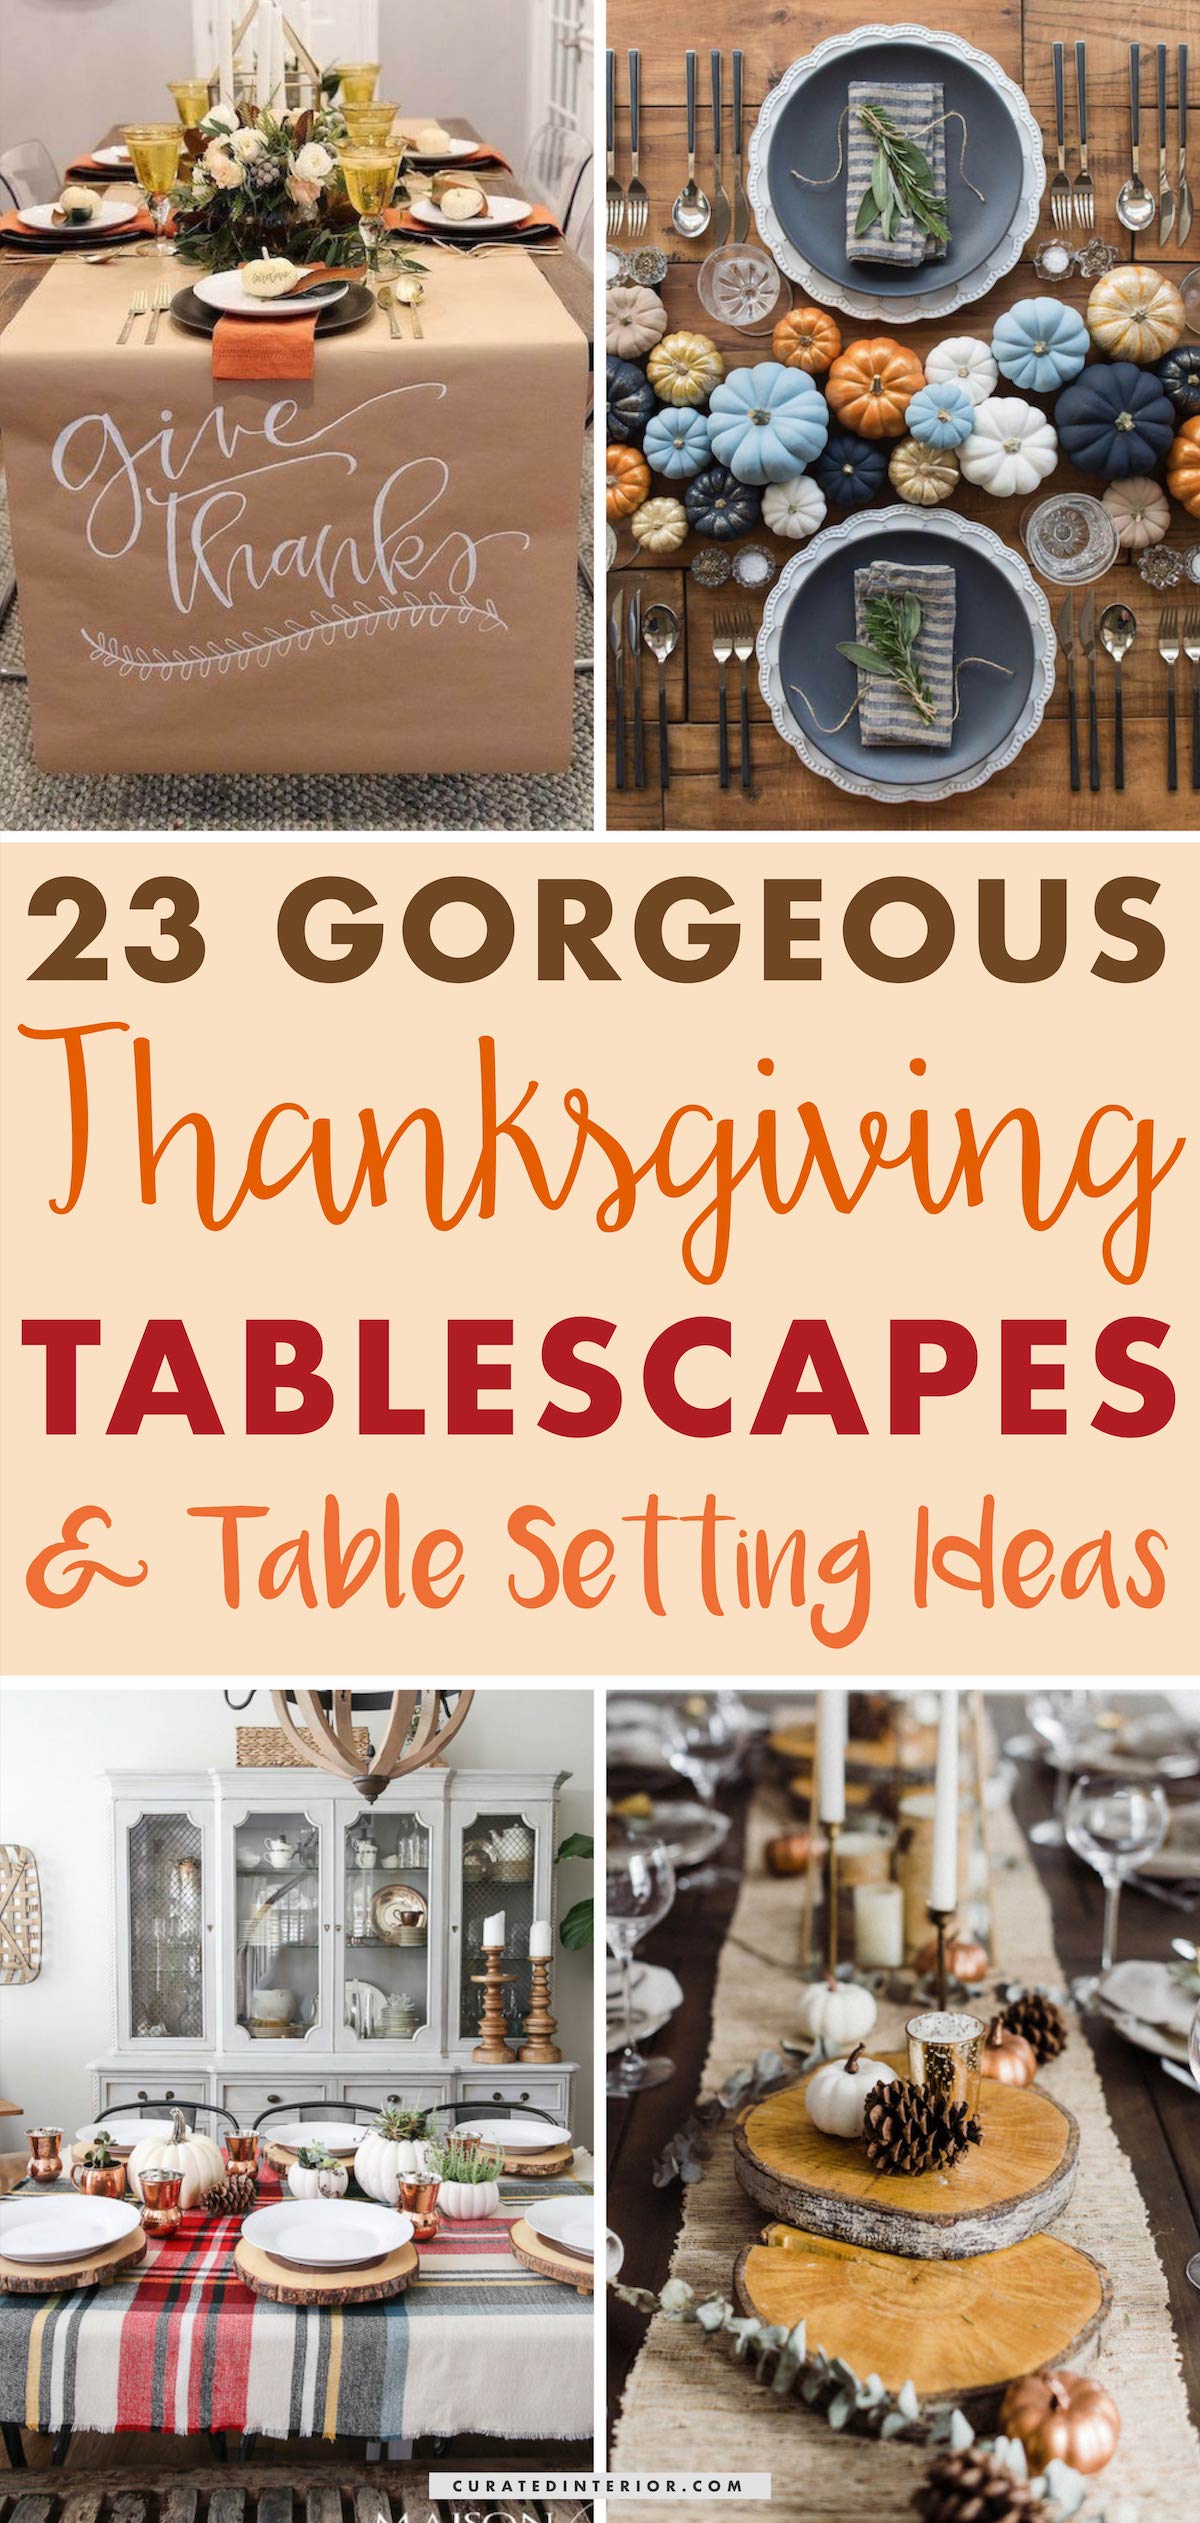 23 Gorgeous Thanksgiving Tablescapes #Thanksgiving #ThanksgivingDecor #ThanksgivingTable